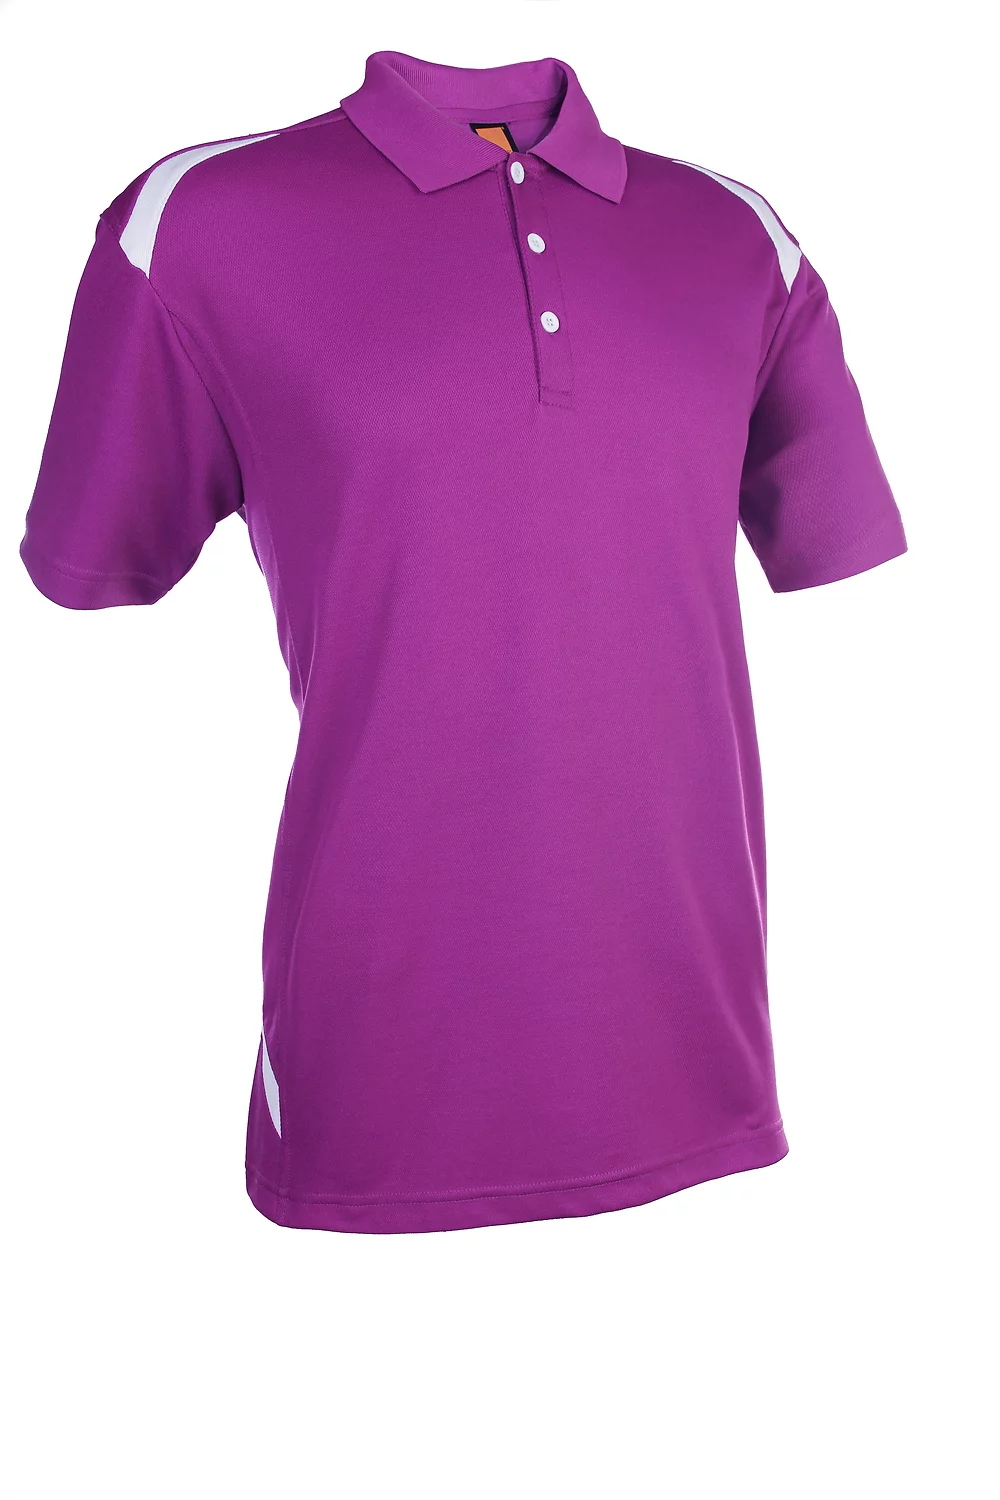 Wholesale Mens Quick Dry Collar Polo T Shirt Manufacturer Supplier Bangladesh Factory